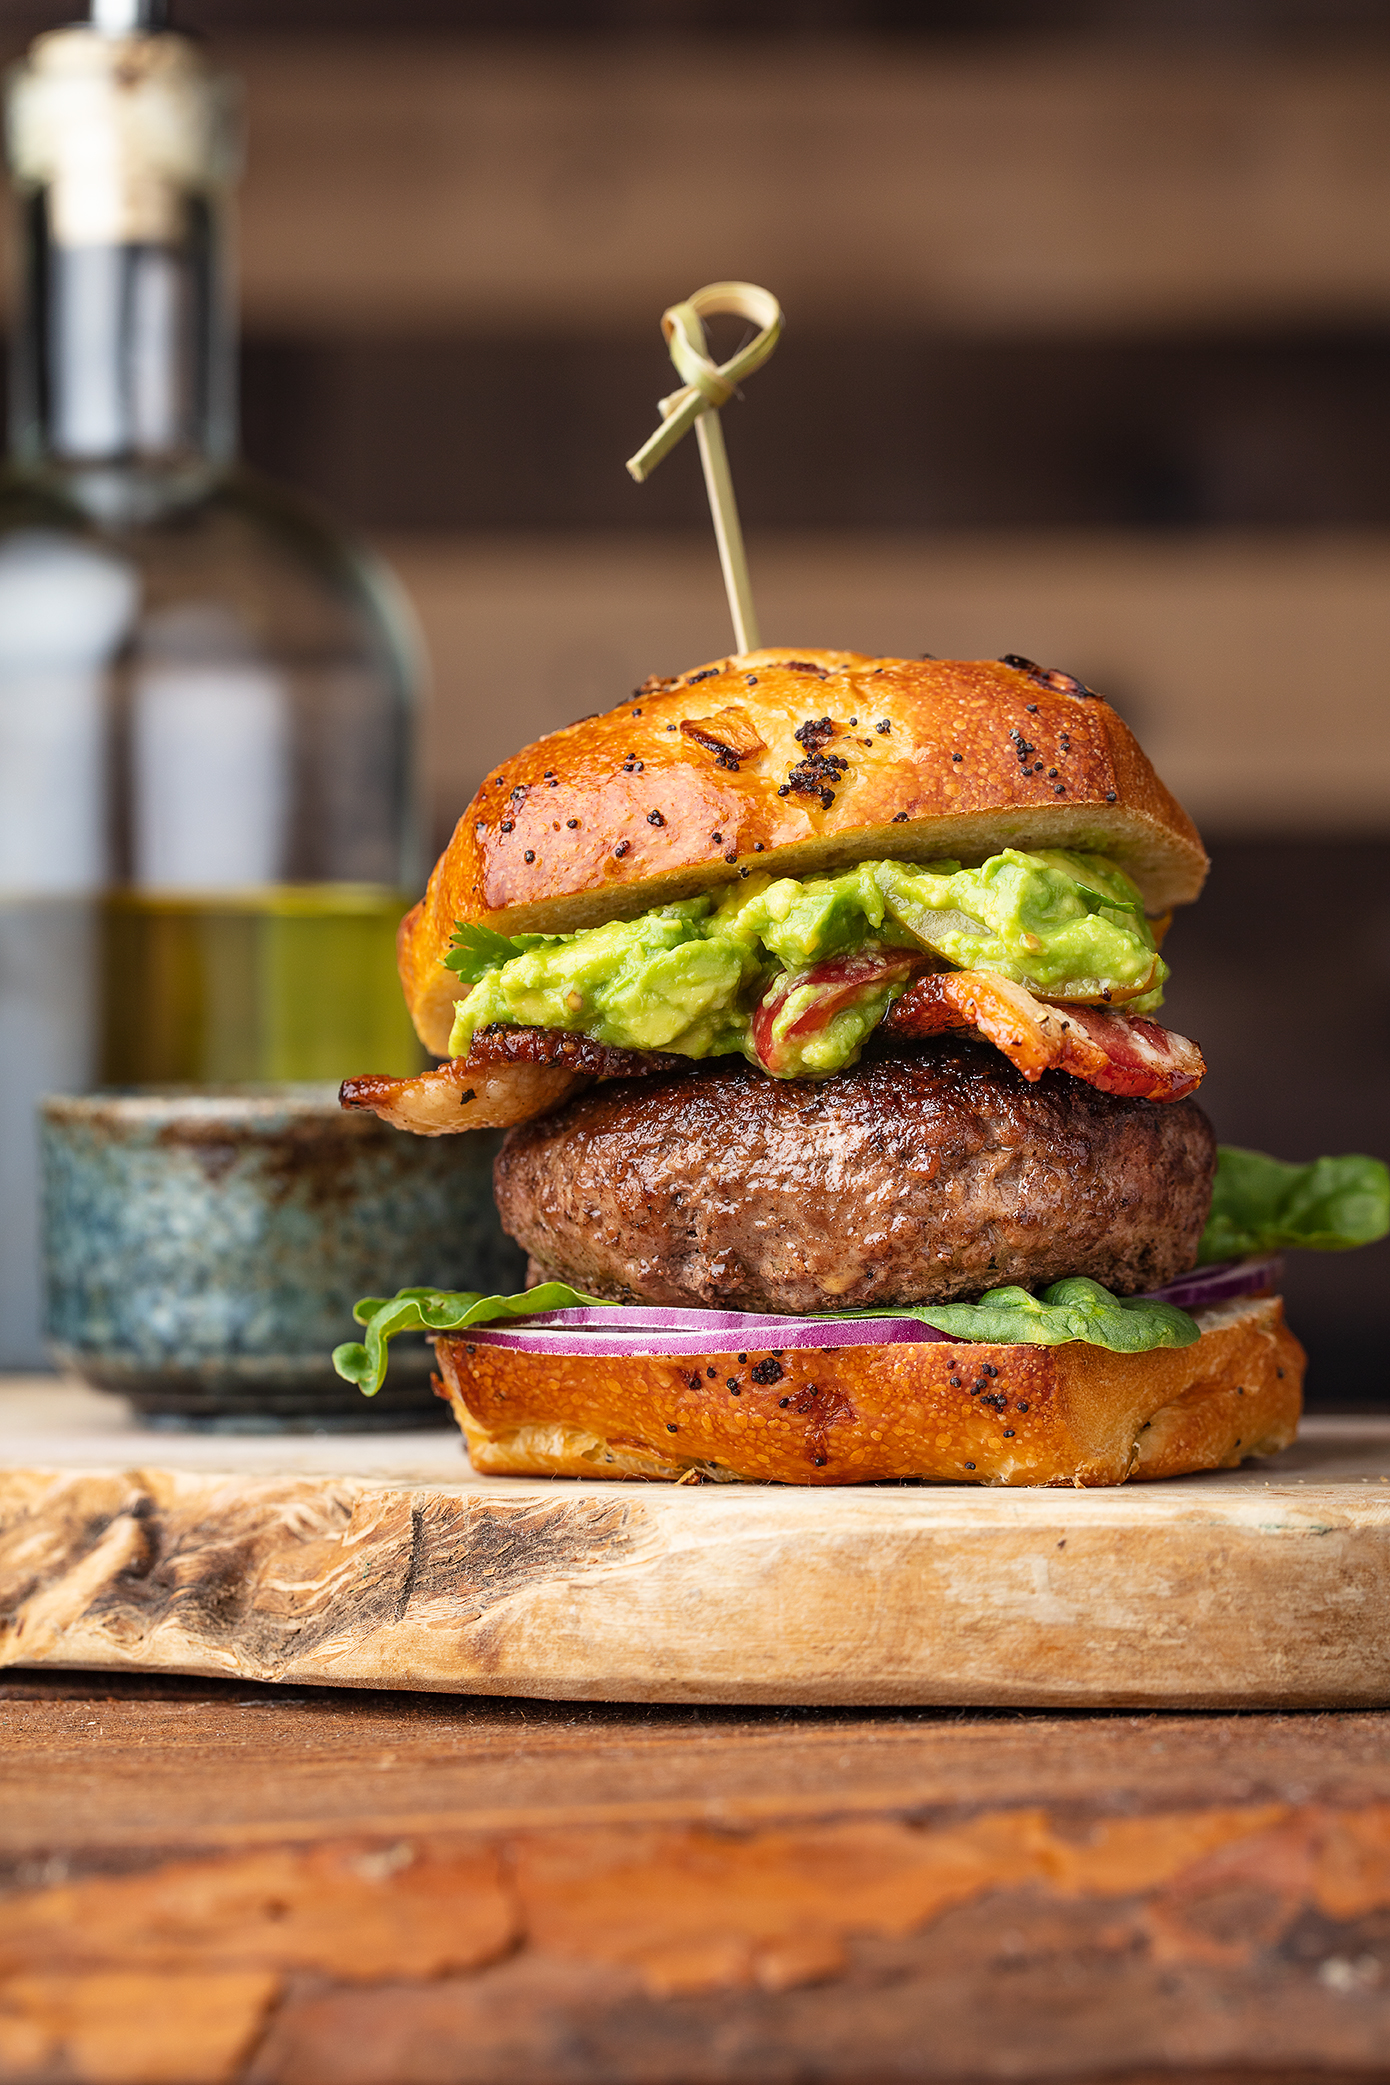 Guac Burger 100mm shot at f8 the best lens for food photography